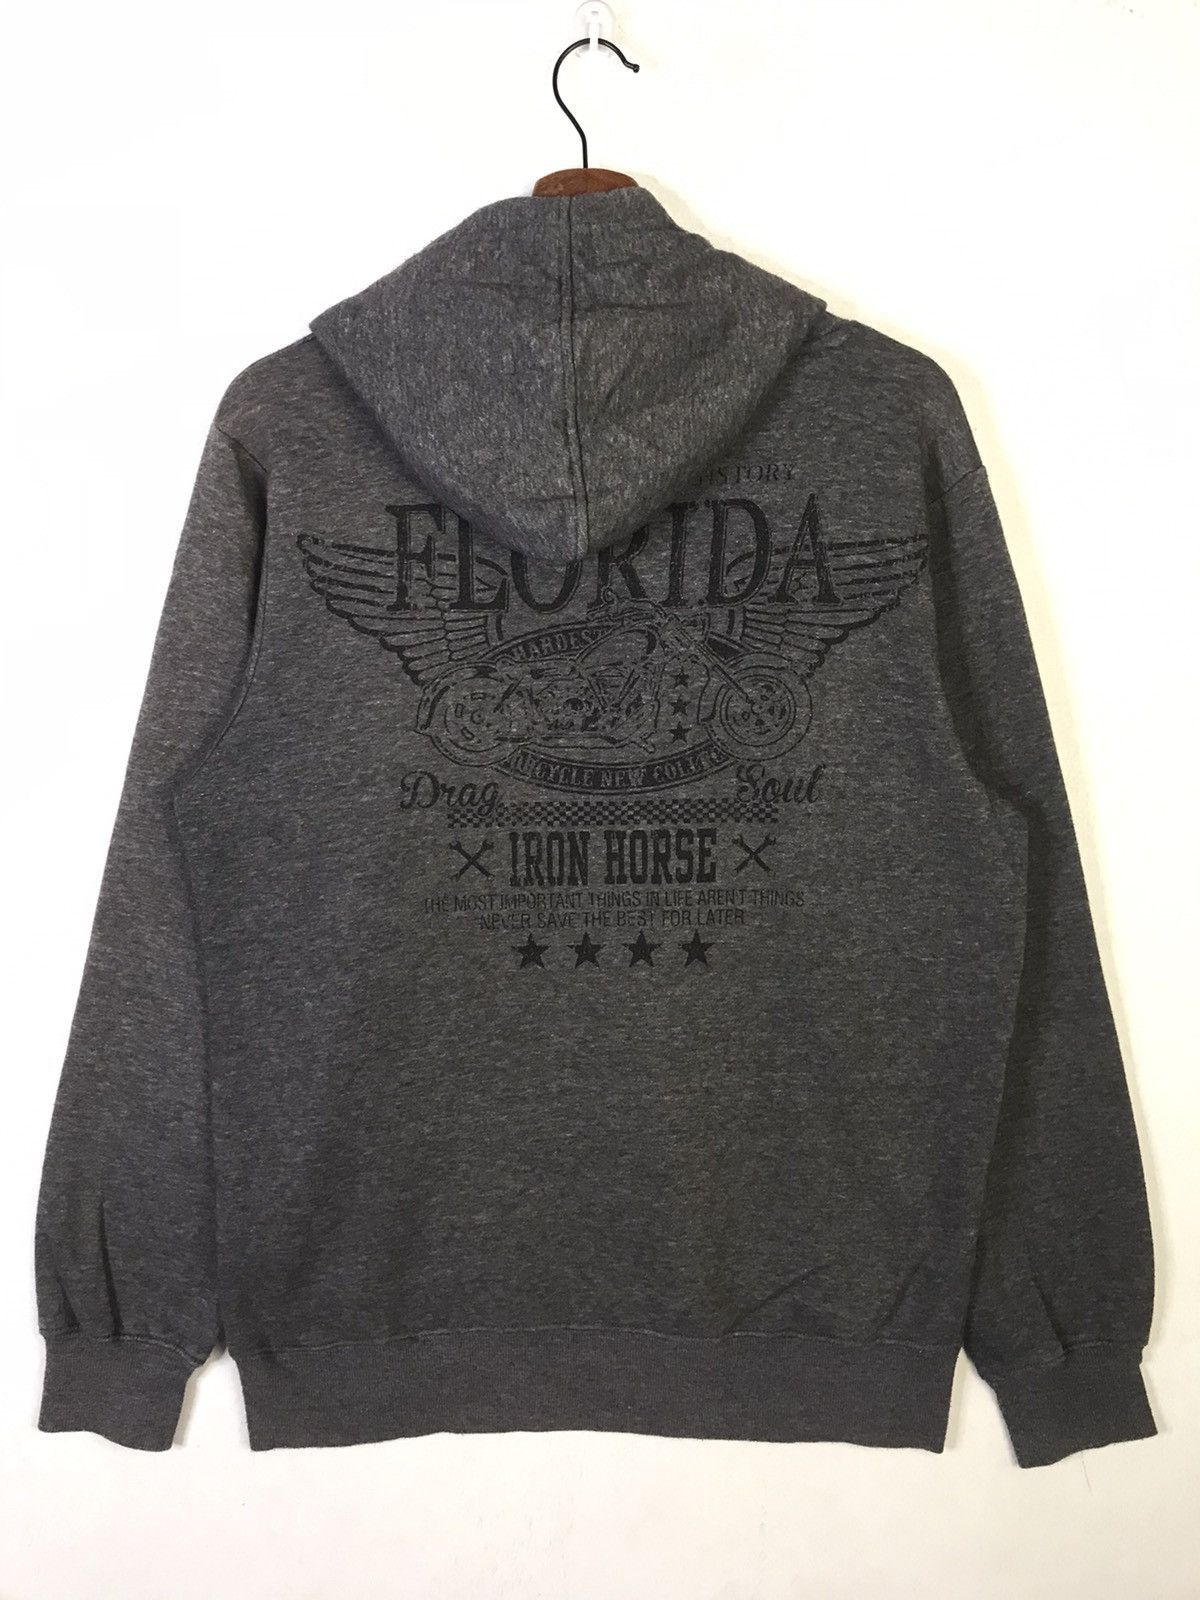 Vintage Florida Motorcyle Iron Horse Pullover Hoodie Size US L / EU 52-54 / 3 - 2 Preview